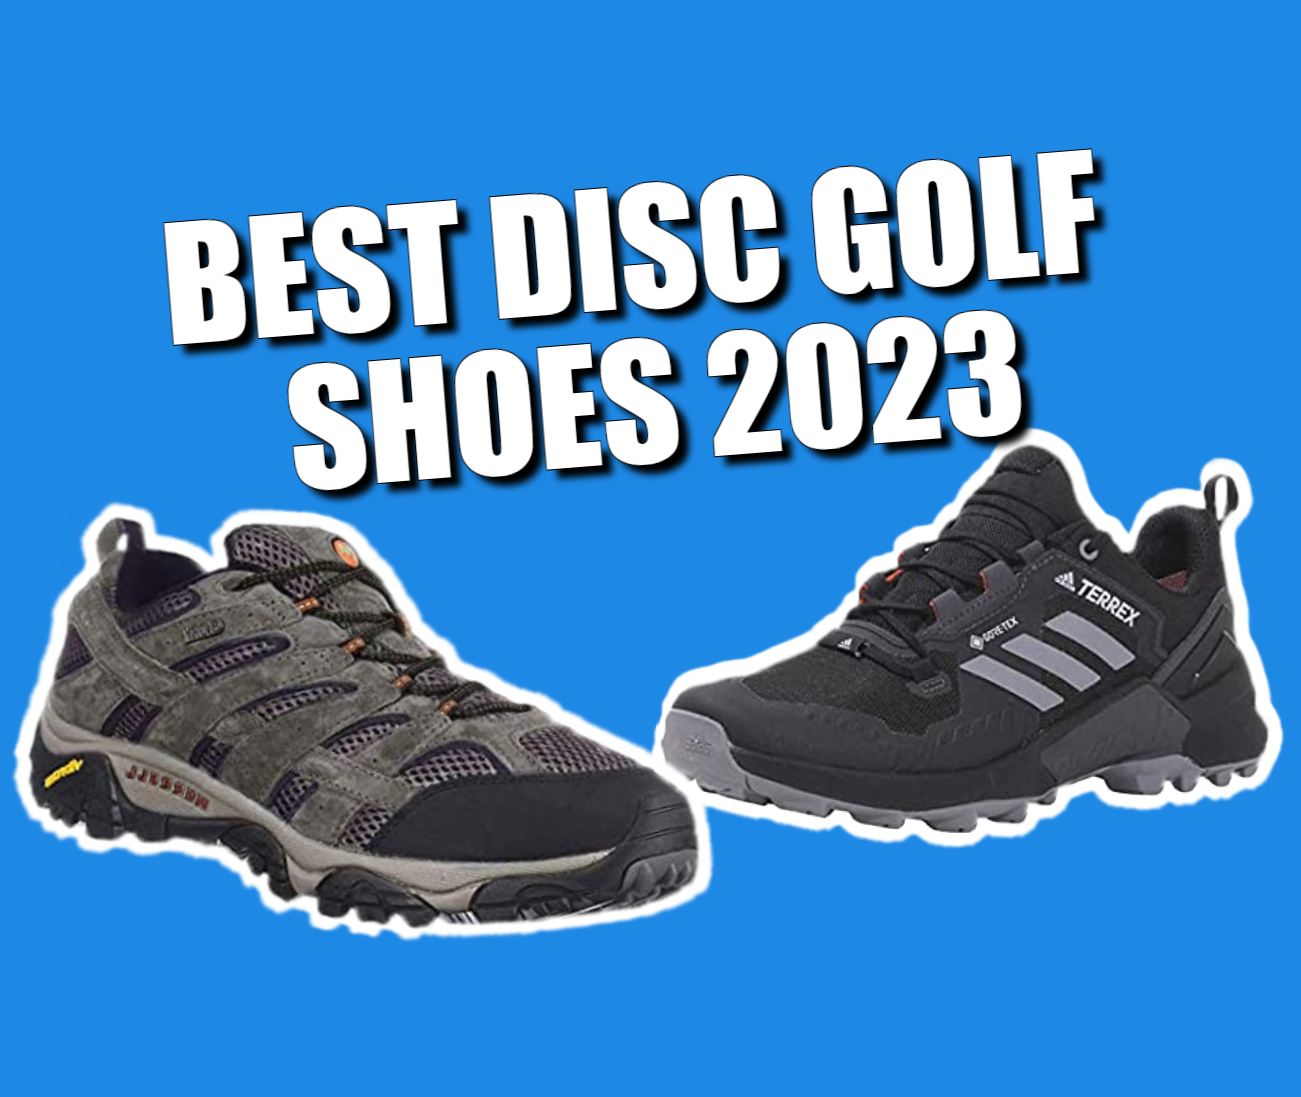 Best disc golf shoes of all-time, 2023 edition